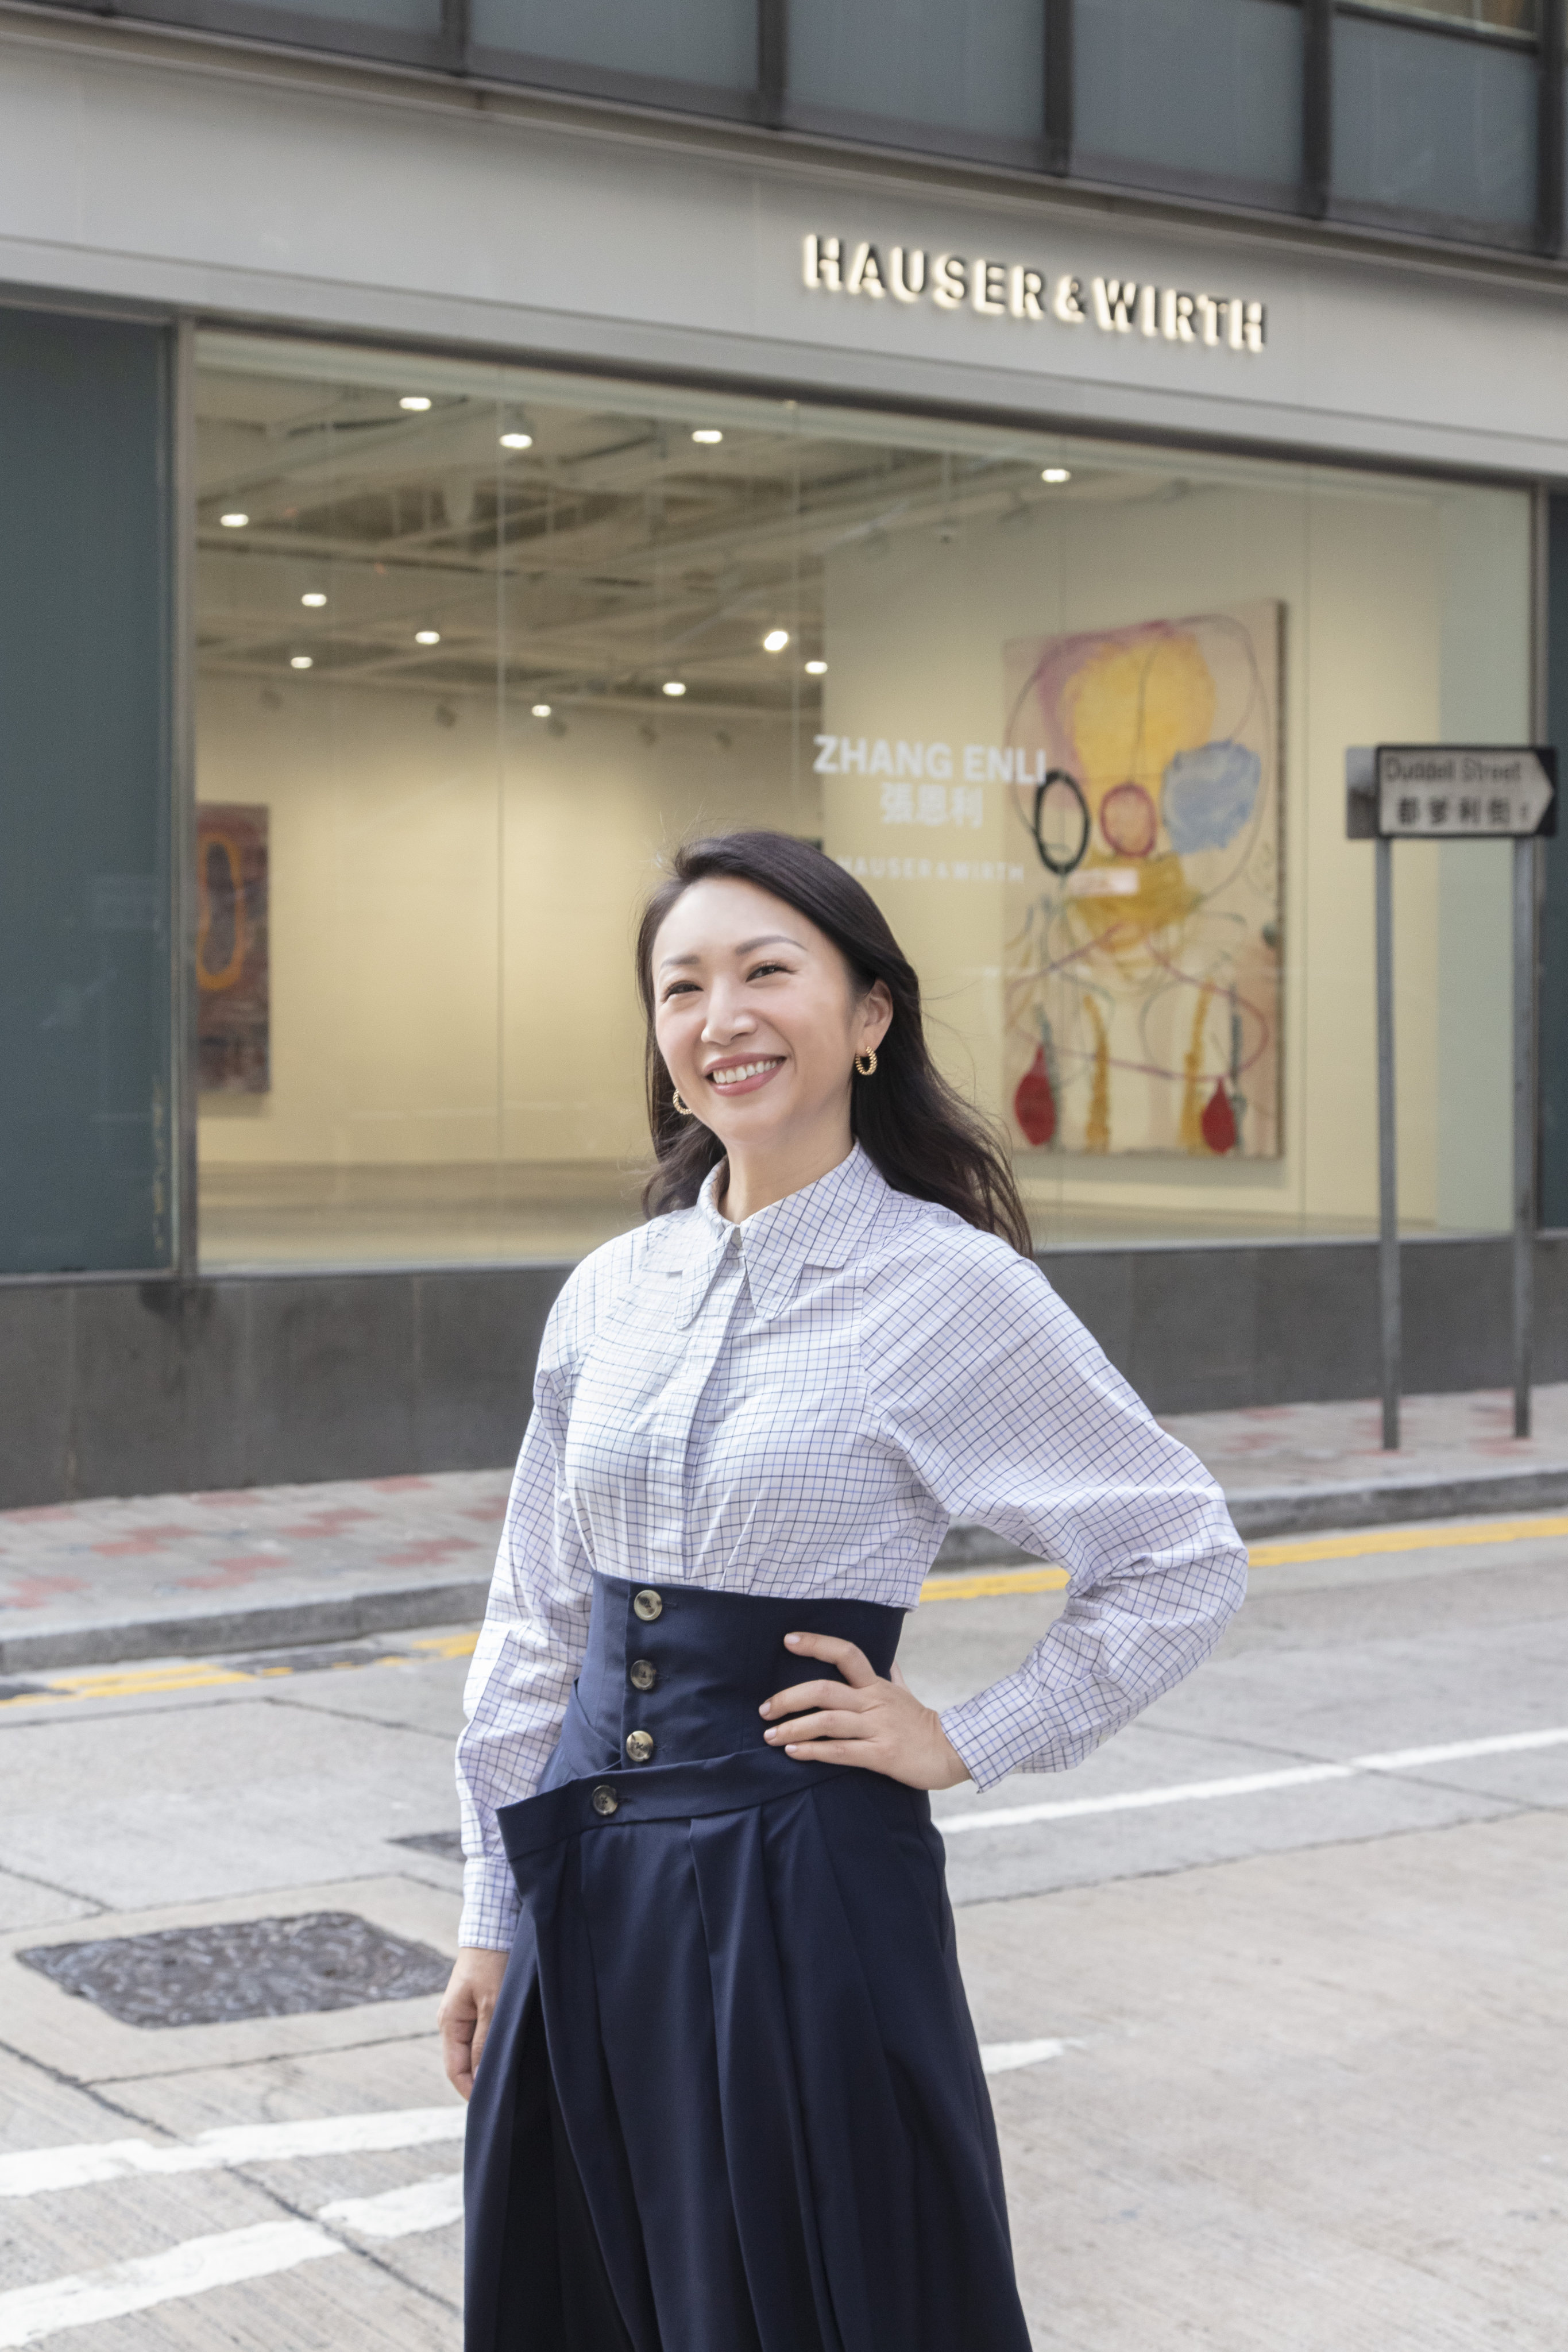 Hauser & Wirth’s Asia managing partner Elaine Kwok  stands outside the gallery’s new Hong Kong location at 8 Queen’s Road Central. The art gallery will kick things off with an exhibition of Chinese artist Zhang Enli. Photo: Hauser & Wirth